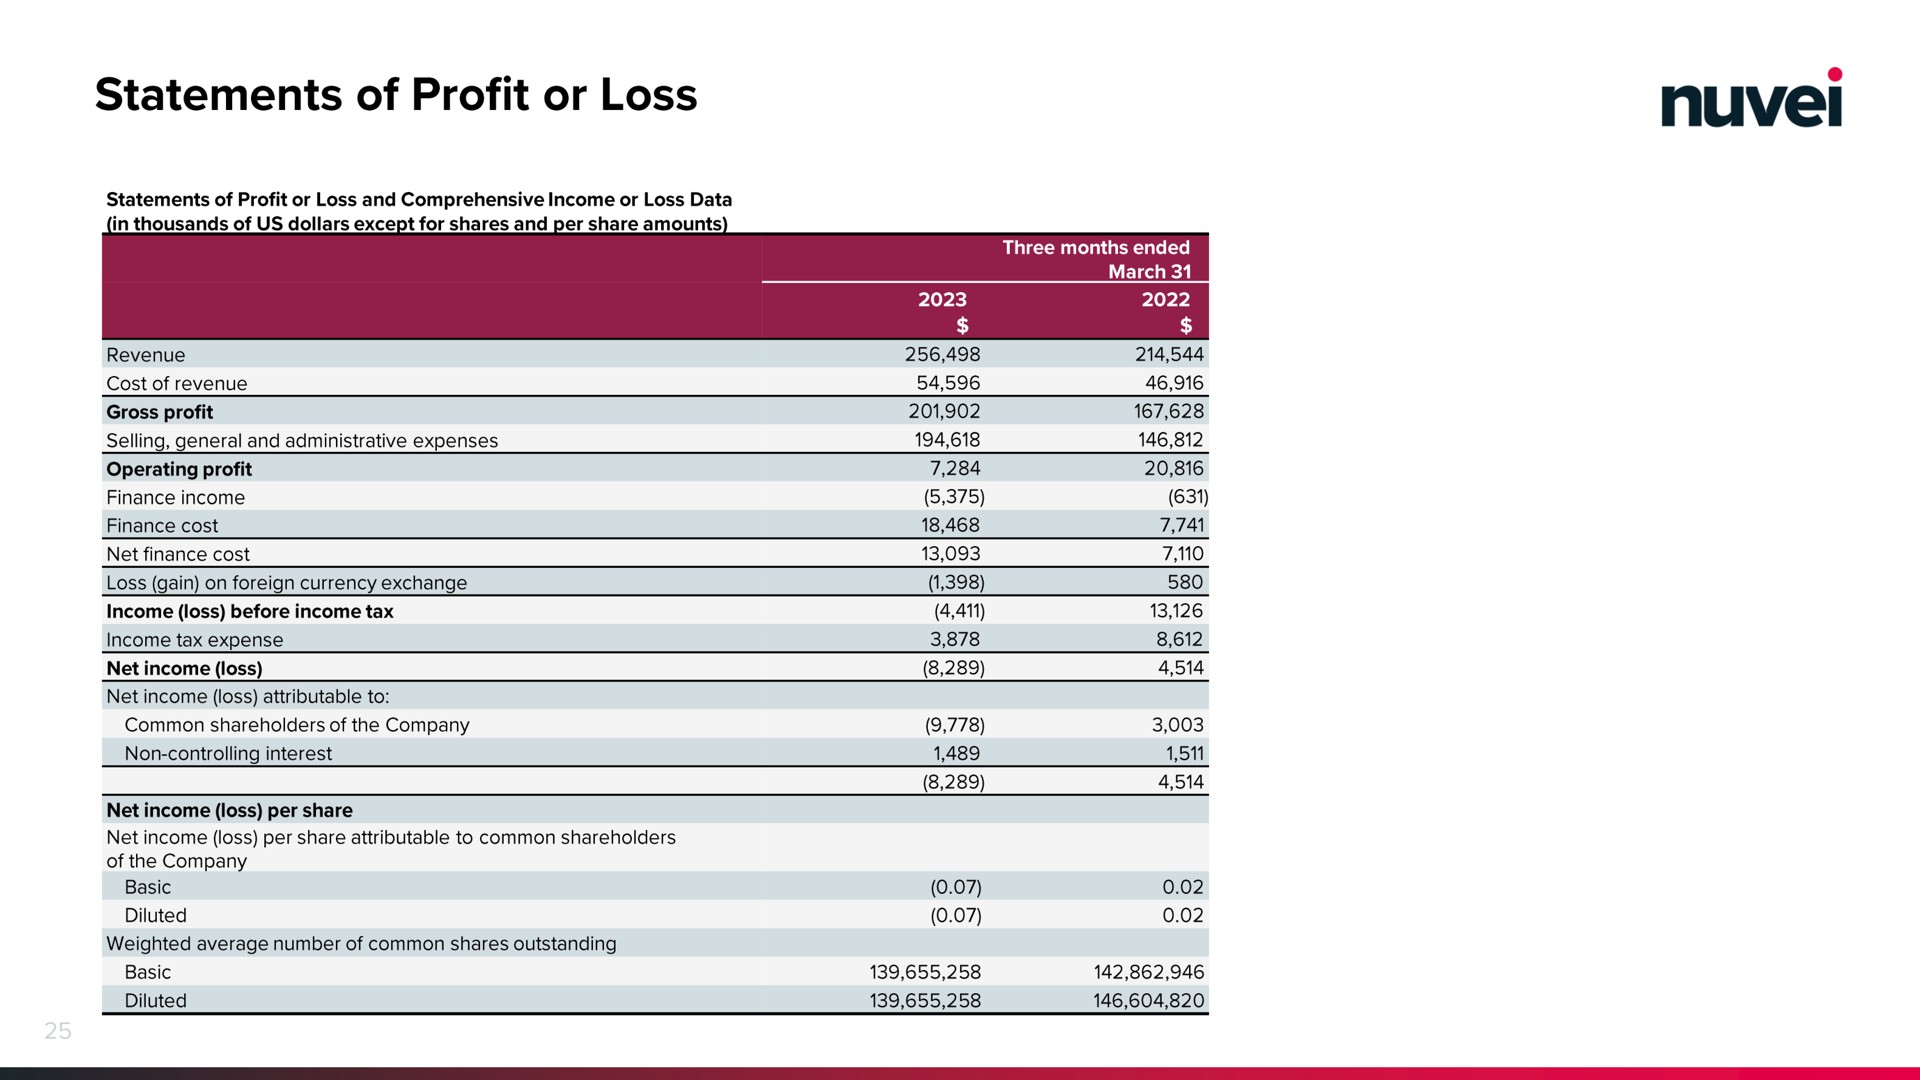 statements of profit or loss | Nuvei